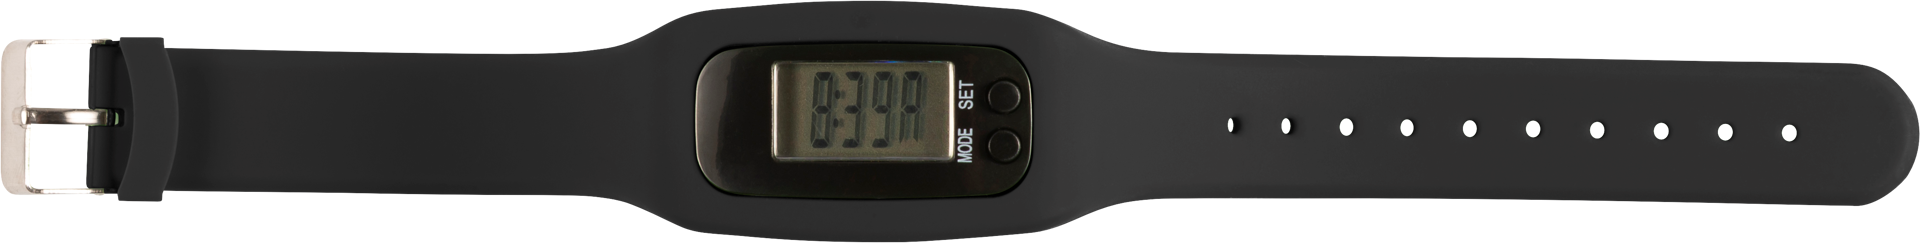 Black pedometer with a black screen 